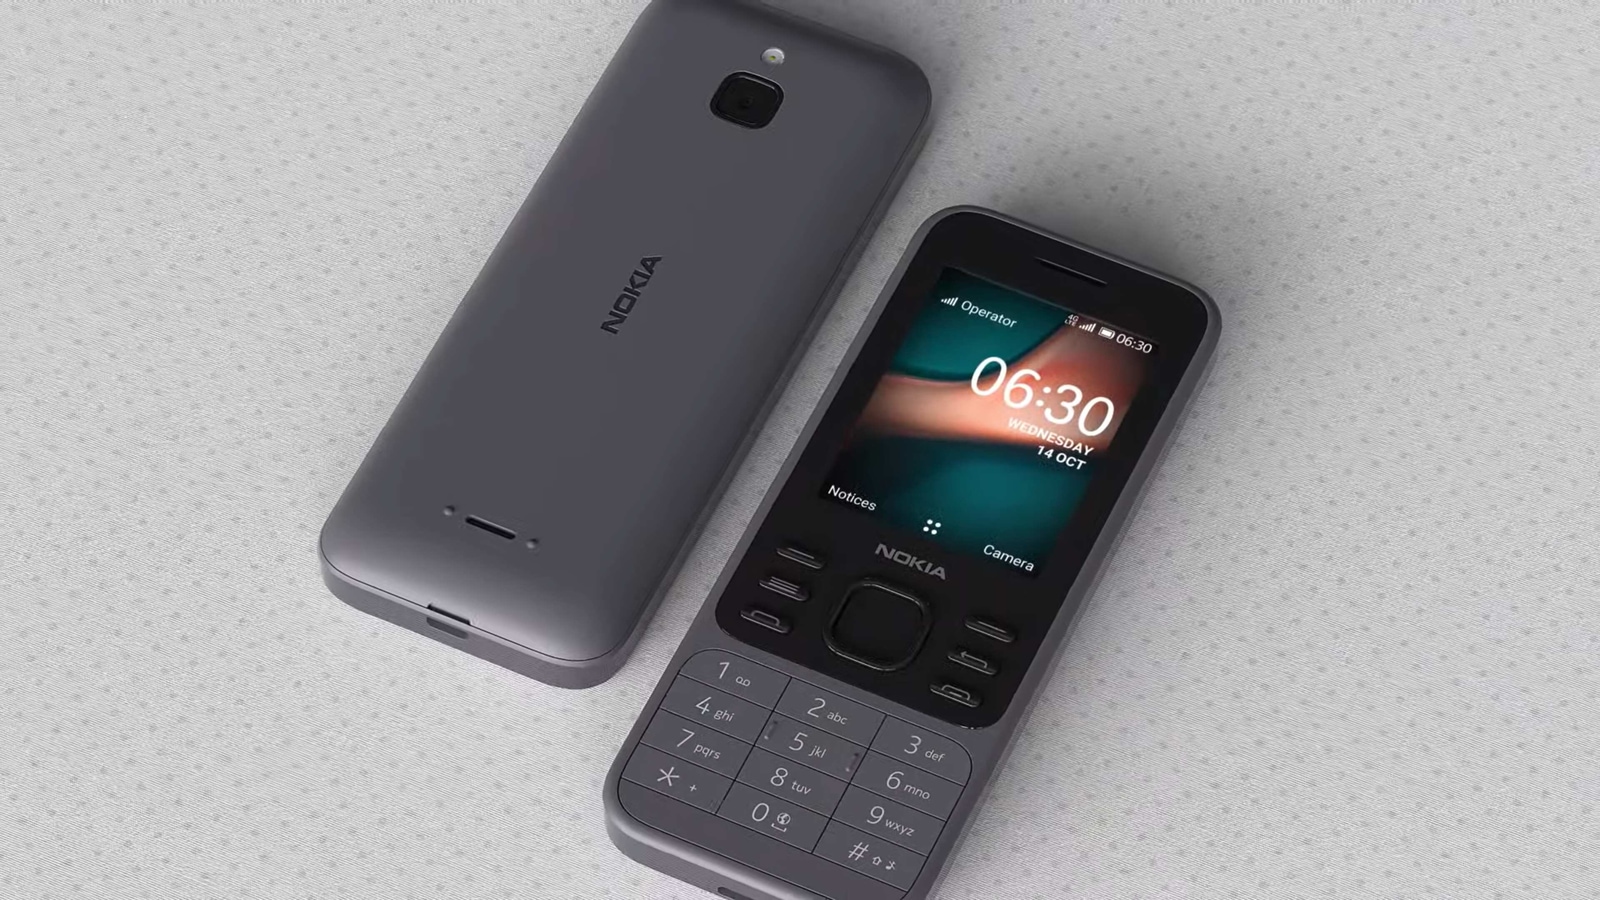 Nokia 6300 4G, 8000 4G feature phones with WhatsApp, Google Assistant  launched – Firstpost